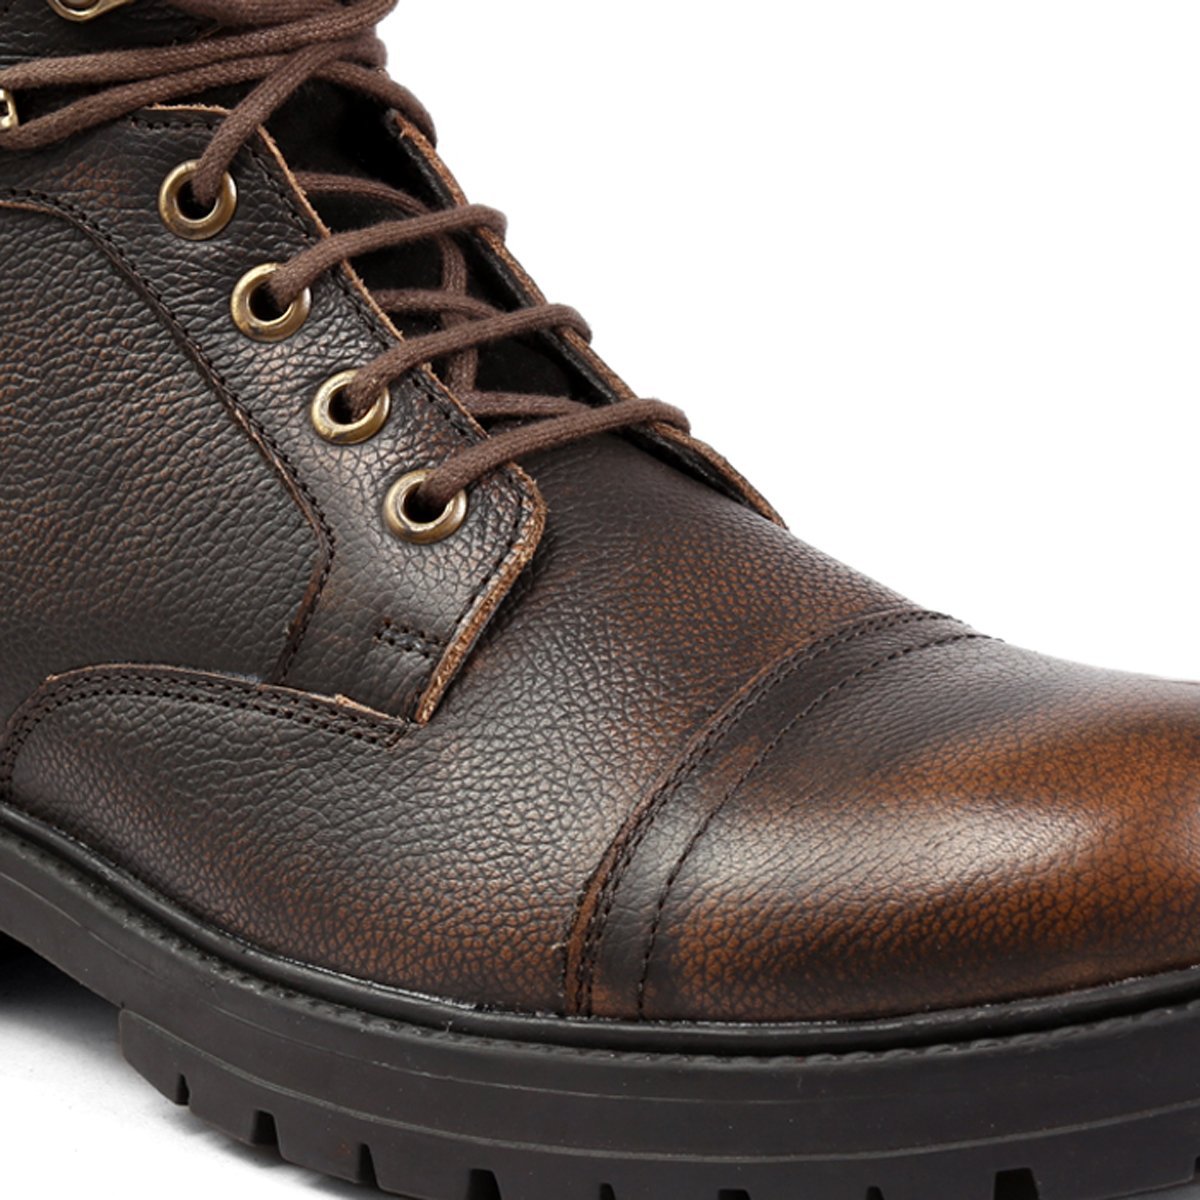 derby boots men, men chukka boots, genuine leather boots, brown leather boots, motorcycle boots, biking boots, water resistant boots